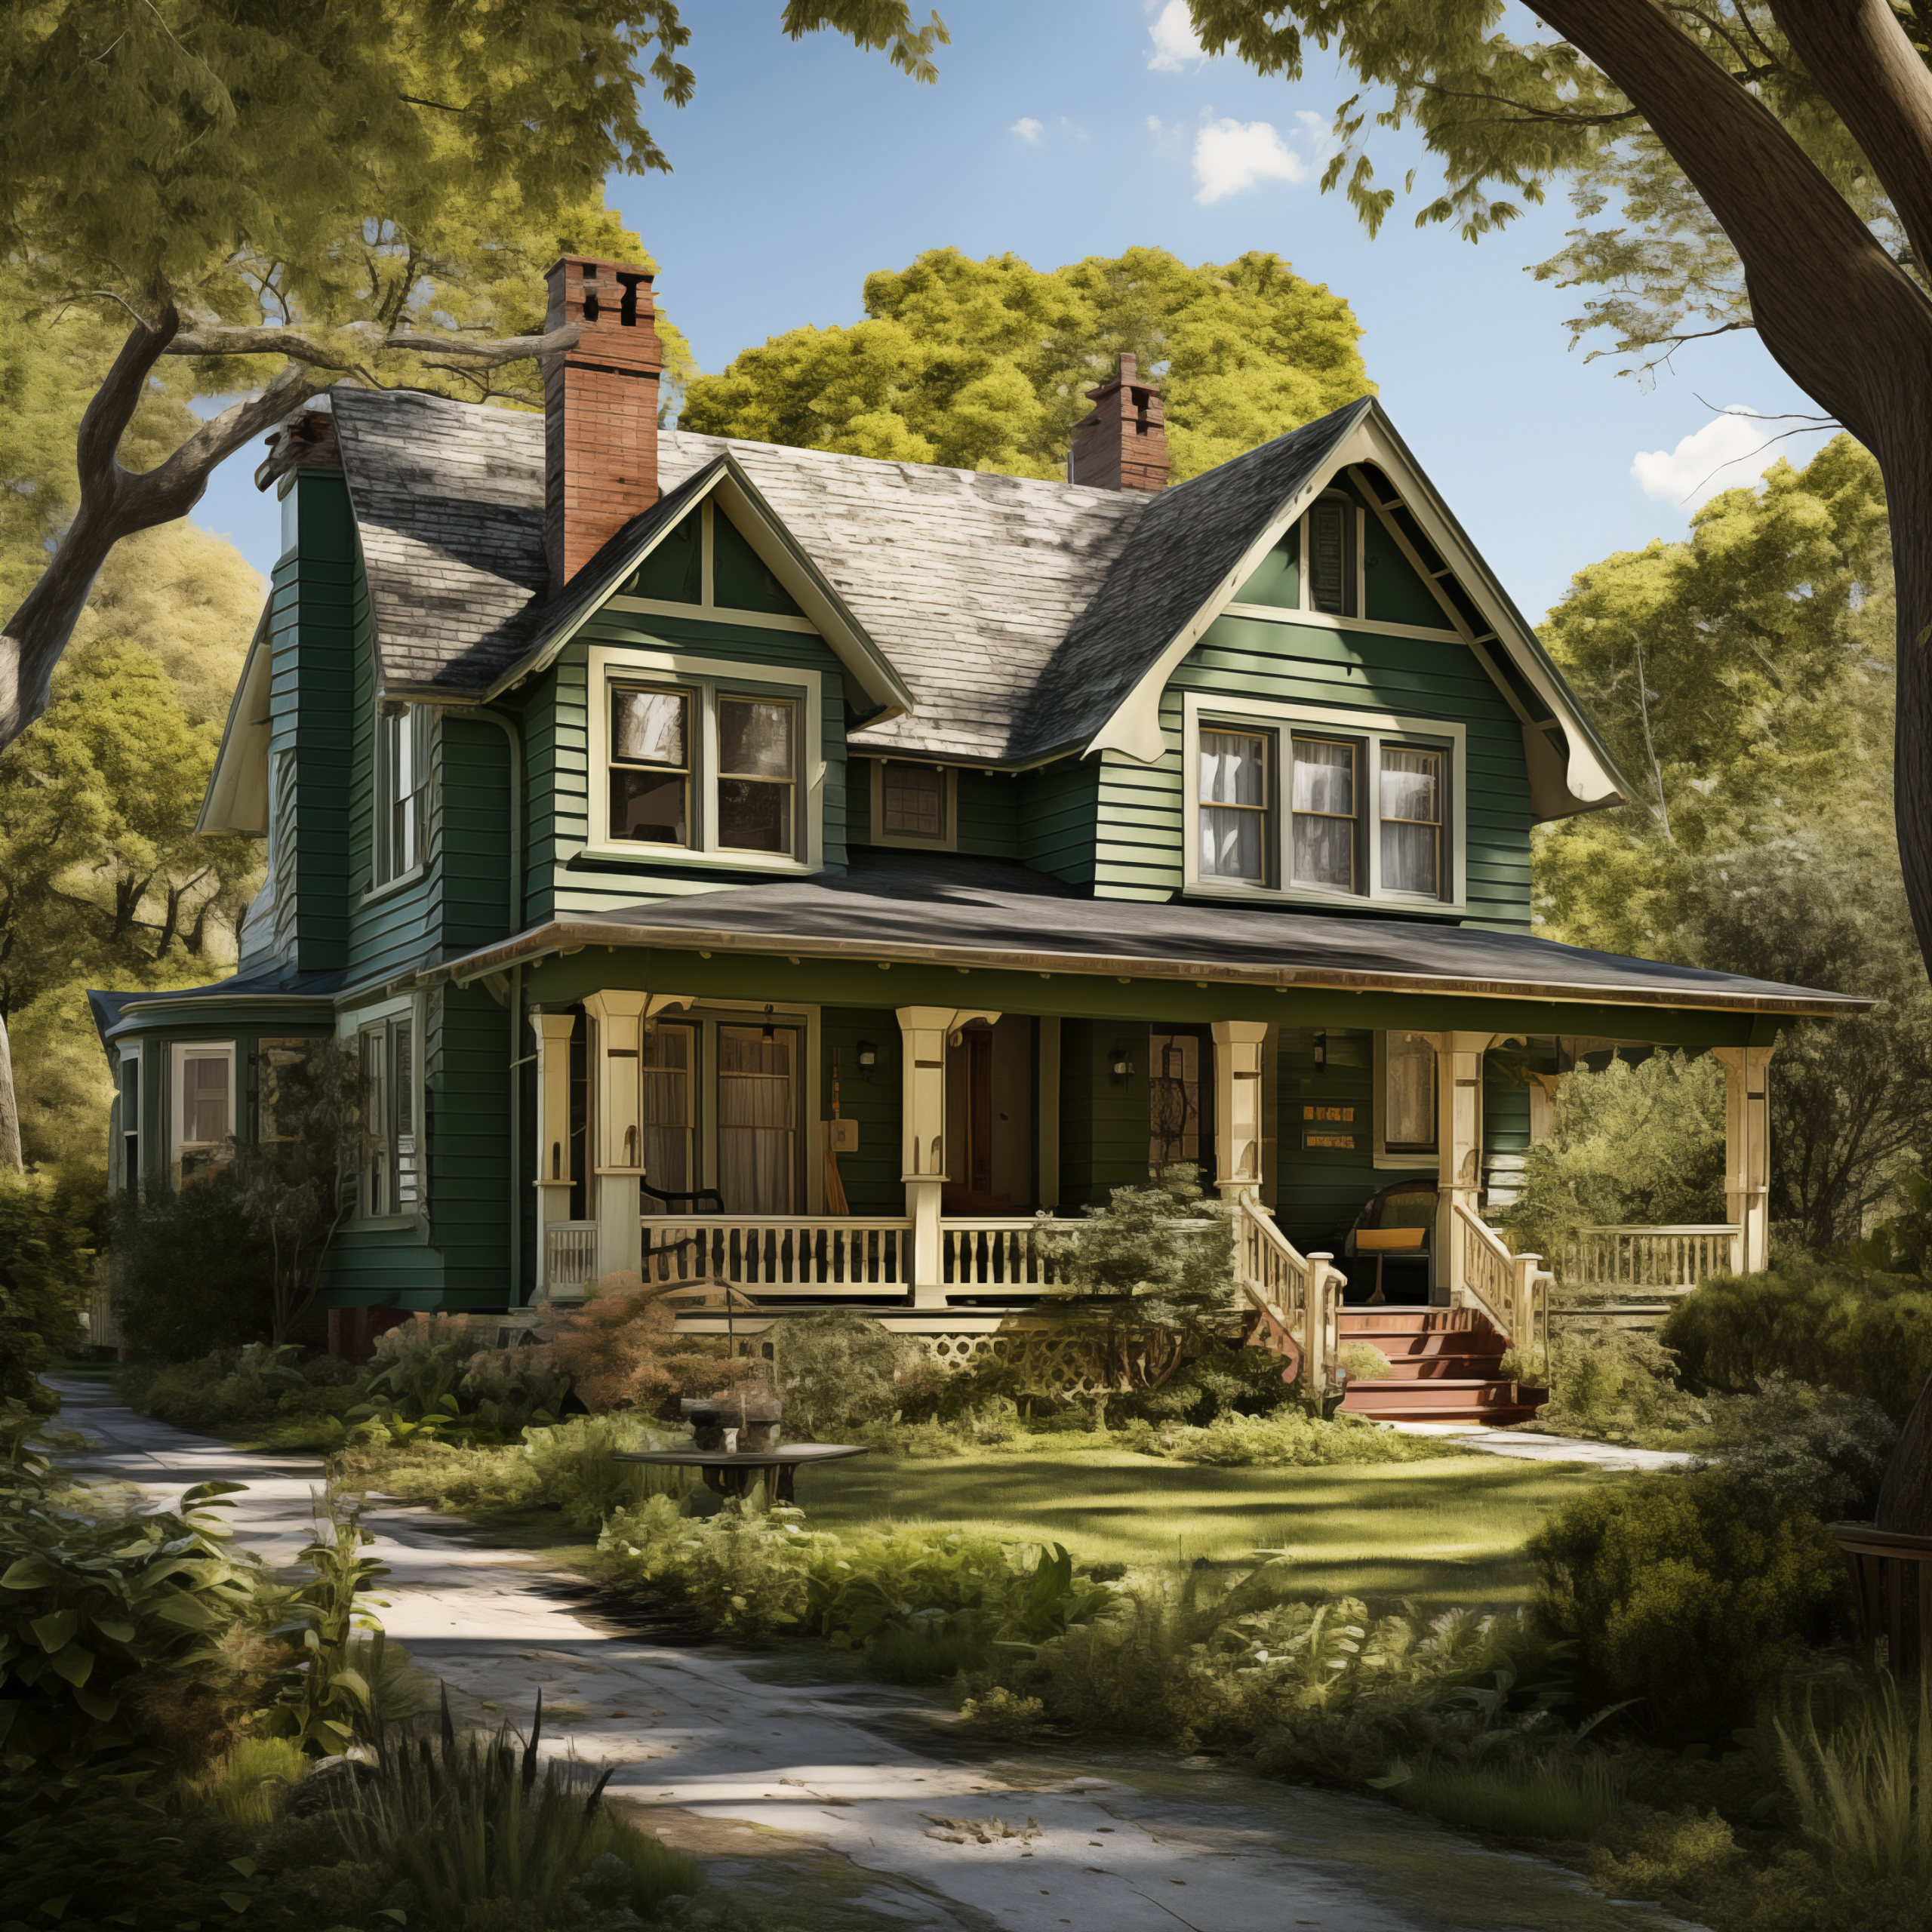 bkp_nlct_trader_single_dwelling_home_set_in_New_England._Grass_gree_c27c2870-9e5c-4d71-b262-a2a3aef7033e